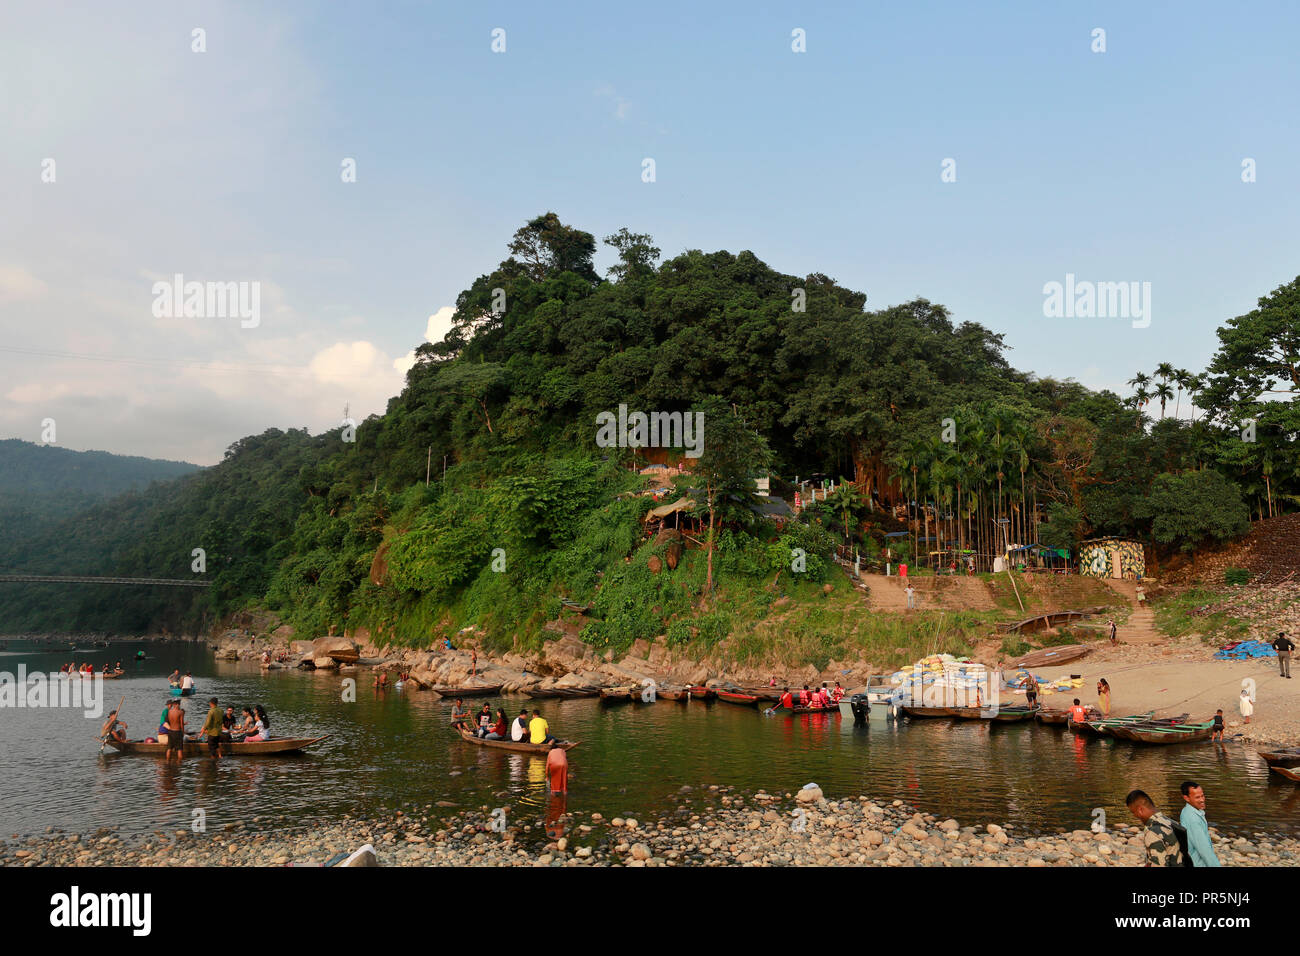 Sylhet, Bangladesh - September 23, 2018: Jaflong is a hill station and popular tourist destination in the Division of Sylhet, Bangladesh. It is locate Stock Photo